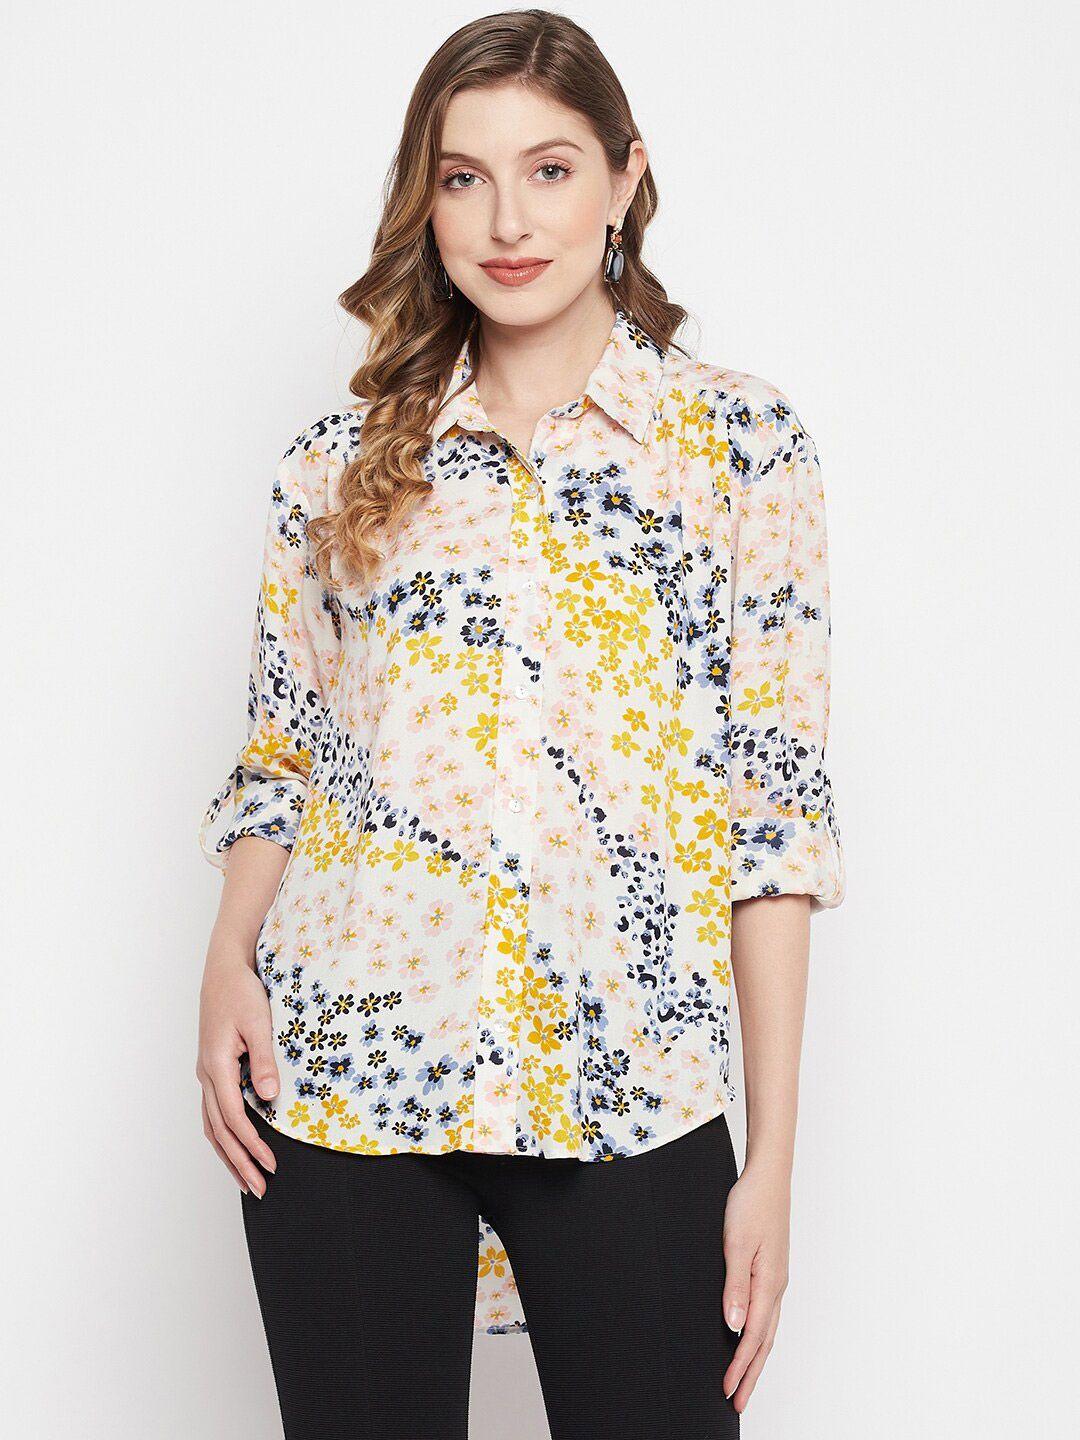 color-cocktail-women-floral-printed-crepe-casual-shirt